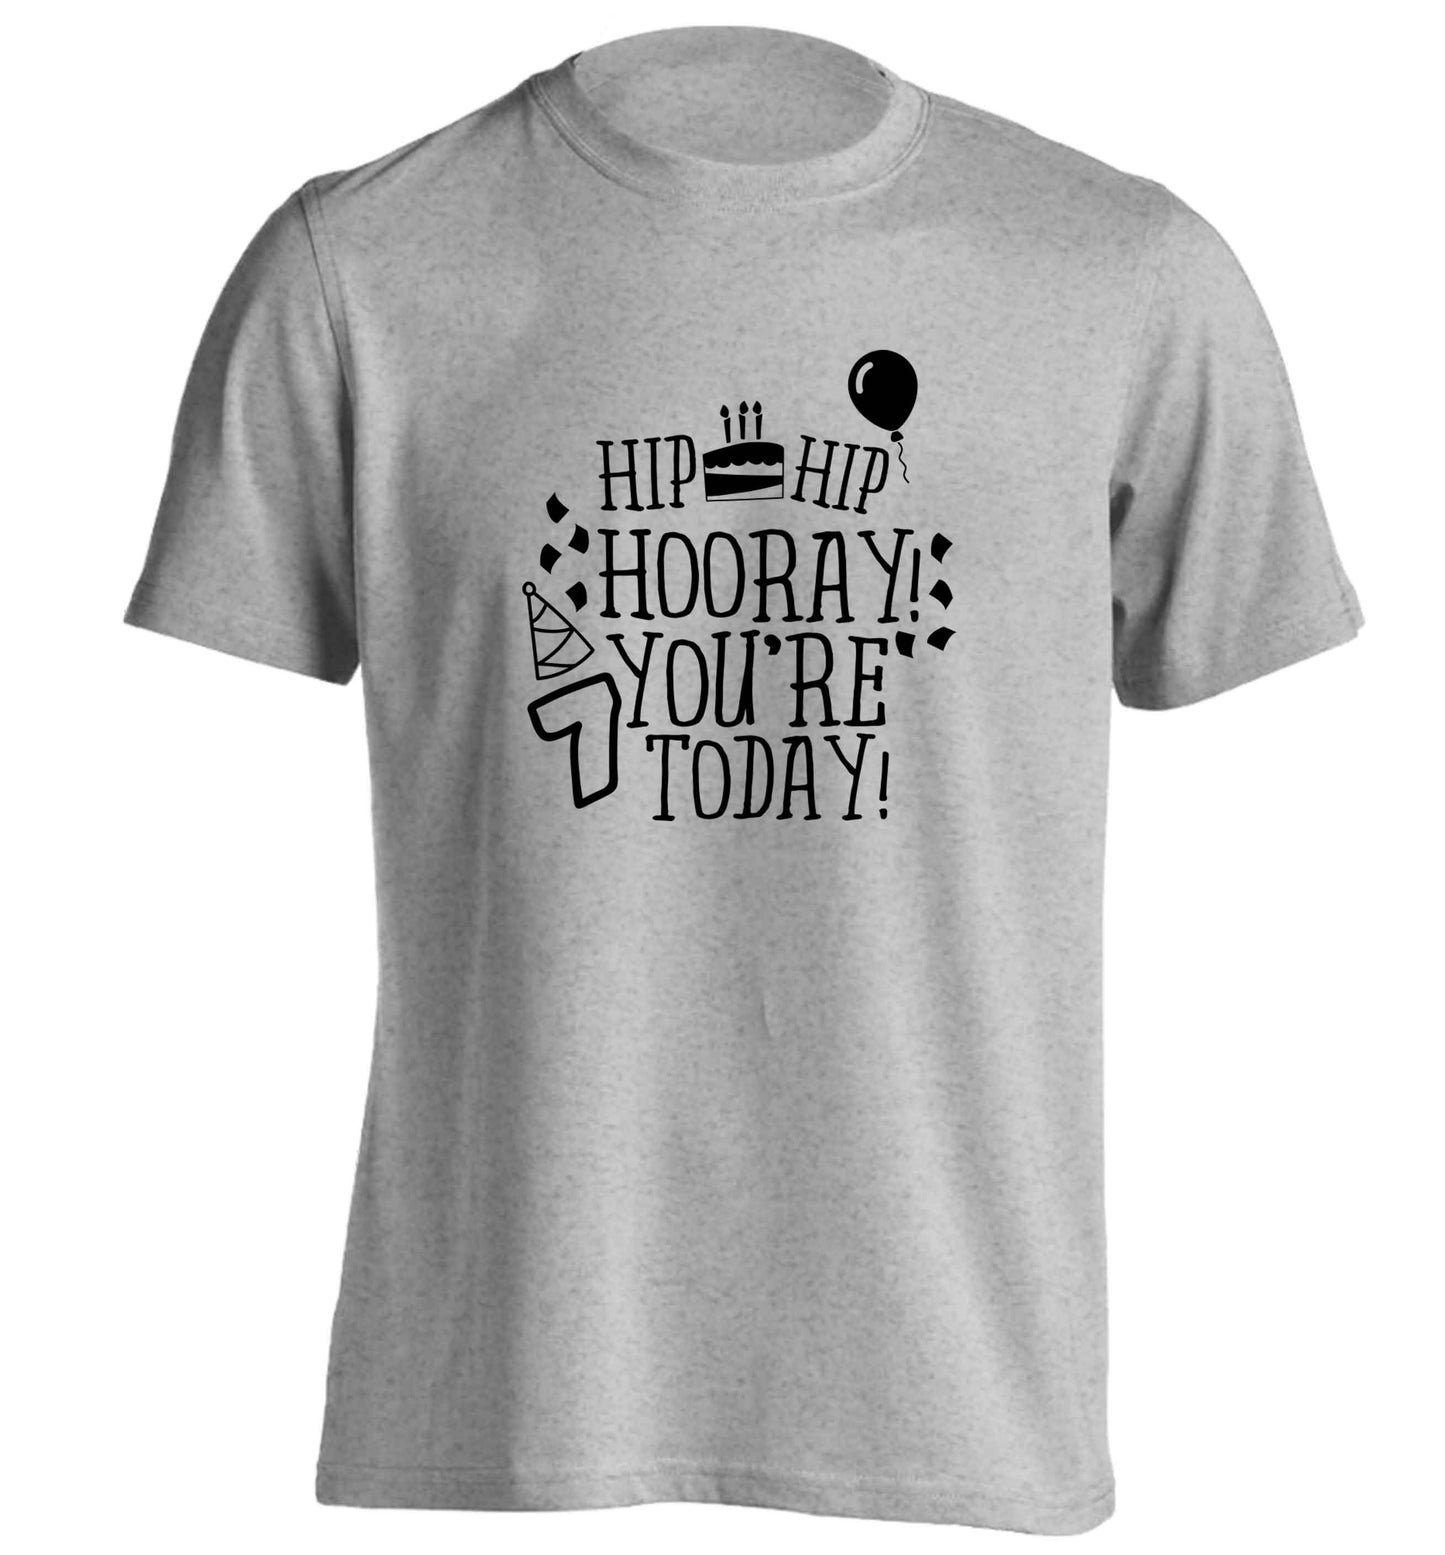 Hip hip hooray you're seven today! adults unisex grey Tshirt 2XL